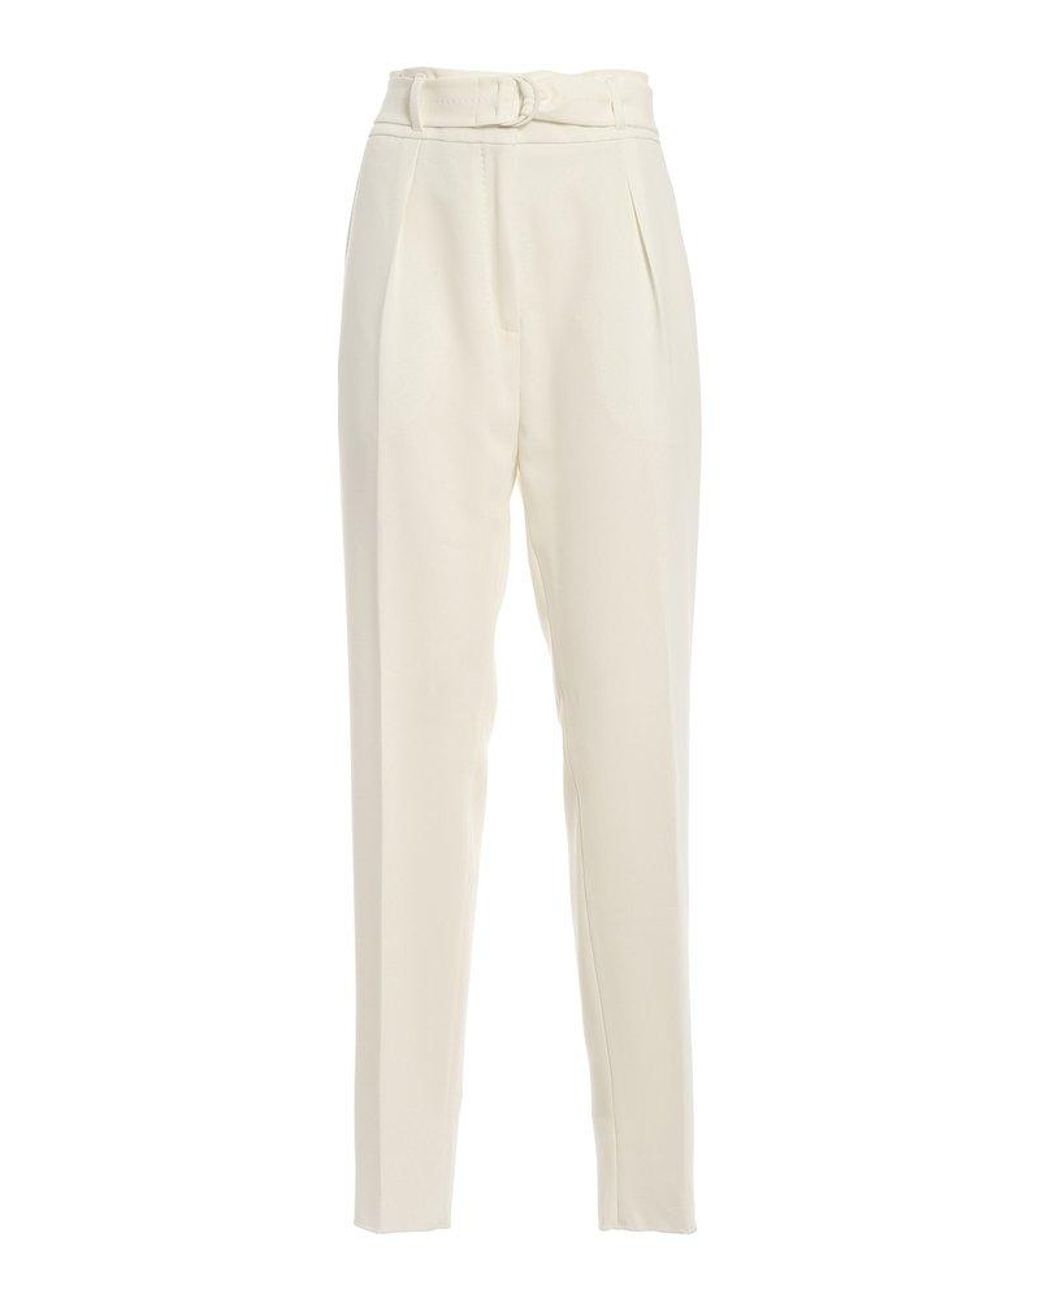 Linen-blend belted trousers - White - Ladies | H&M MY